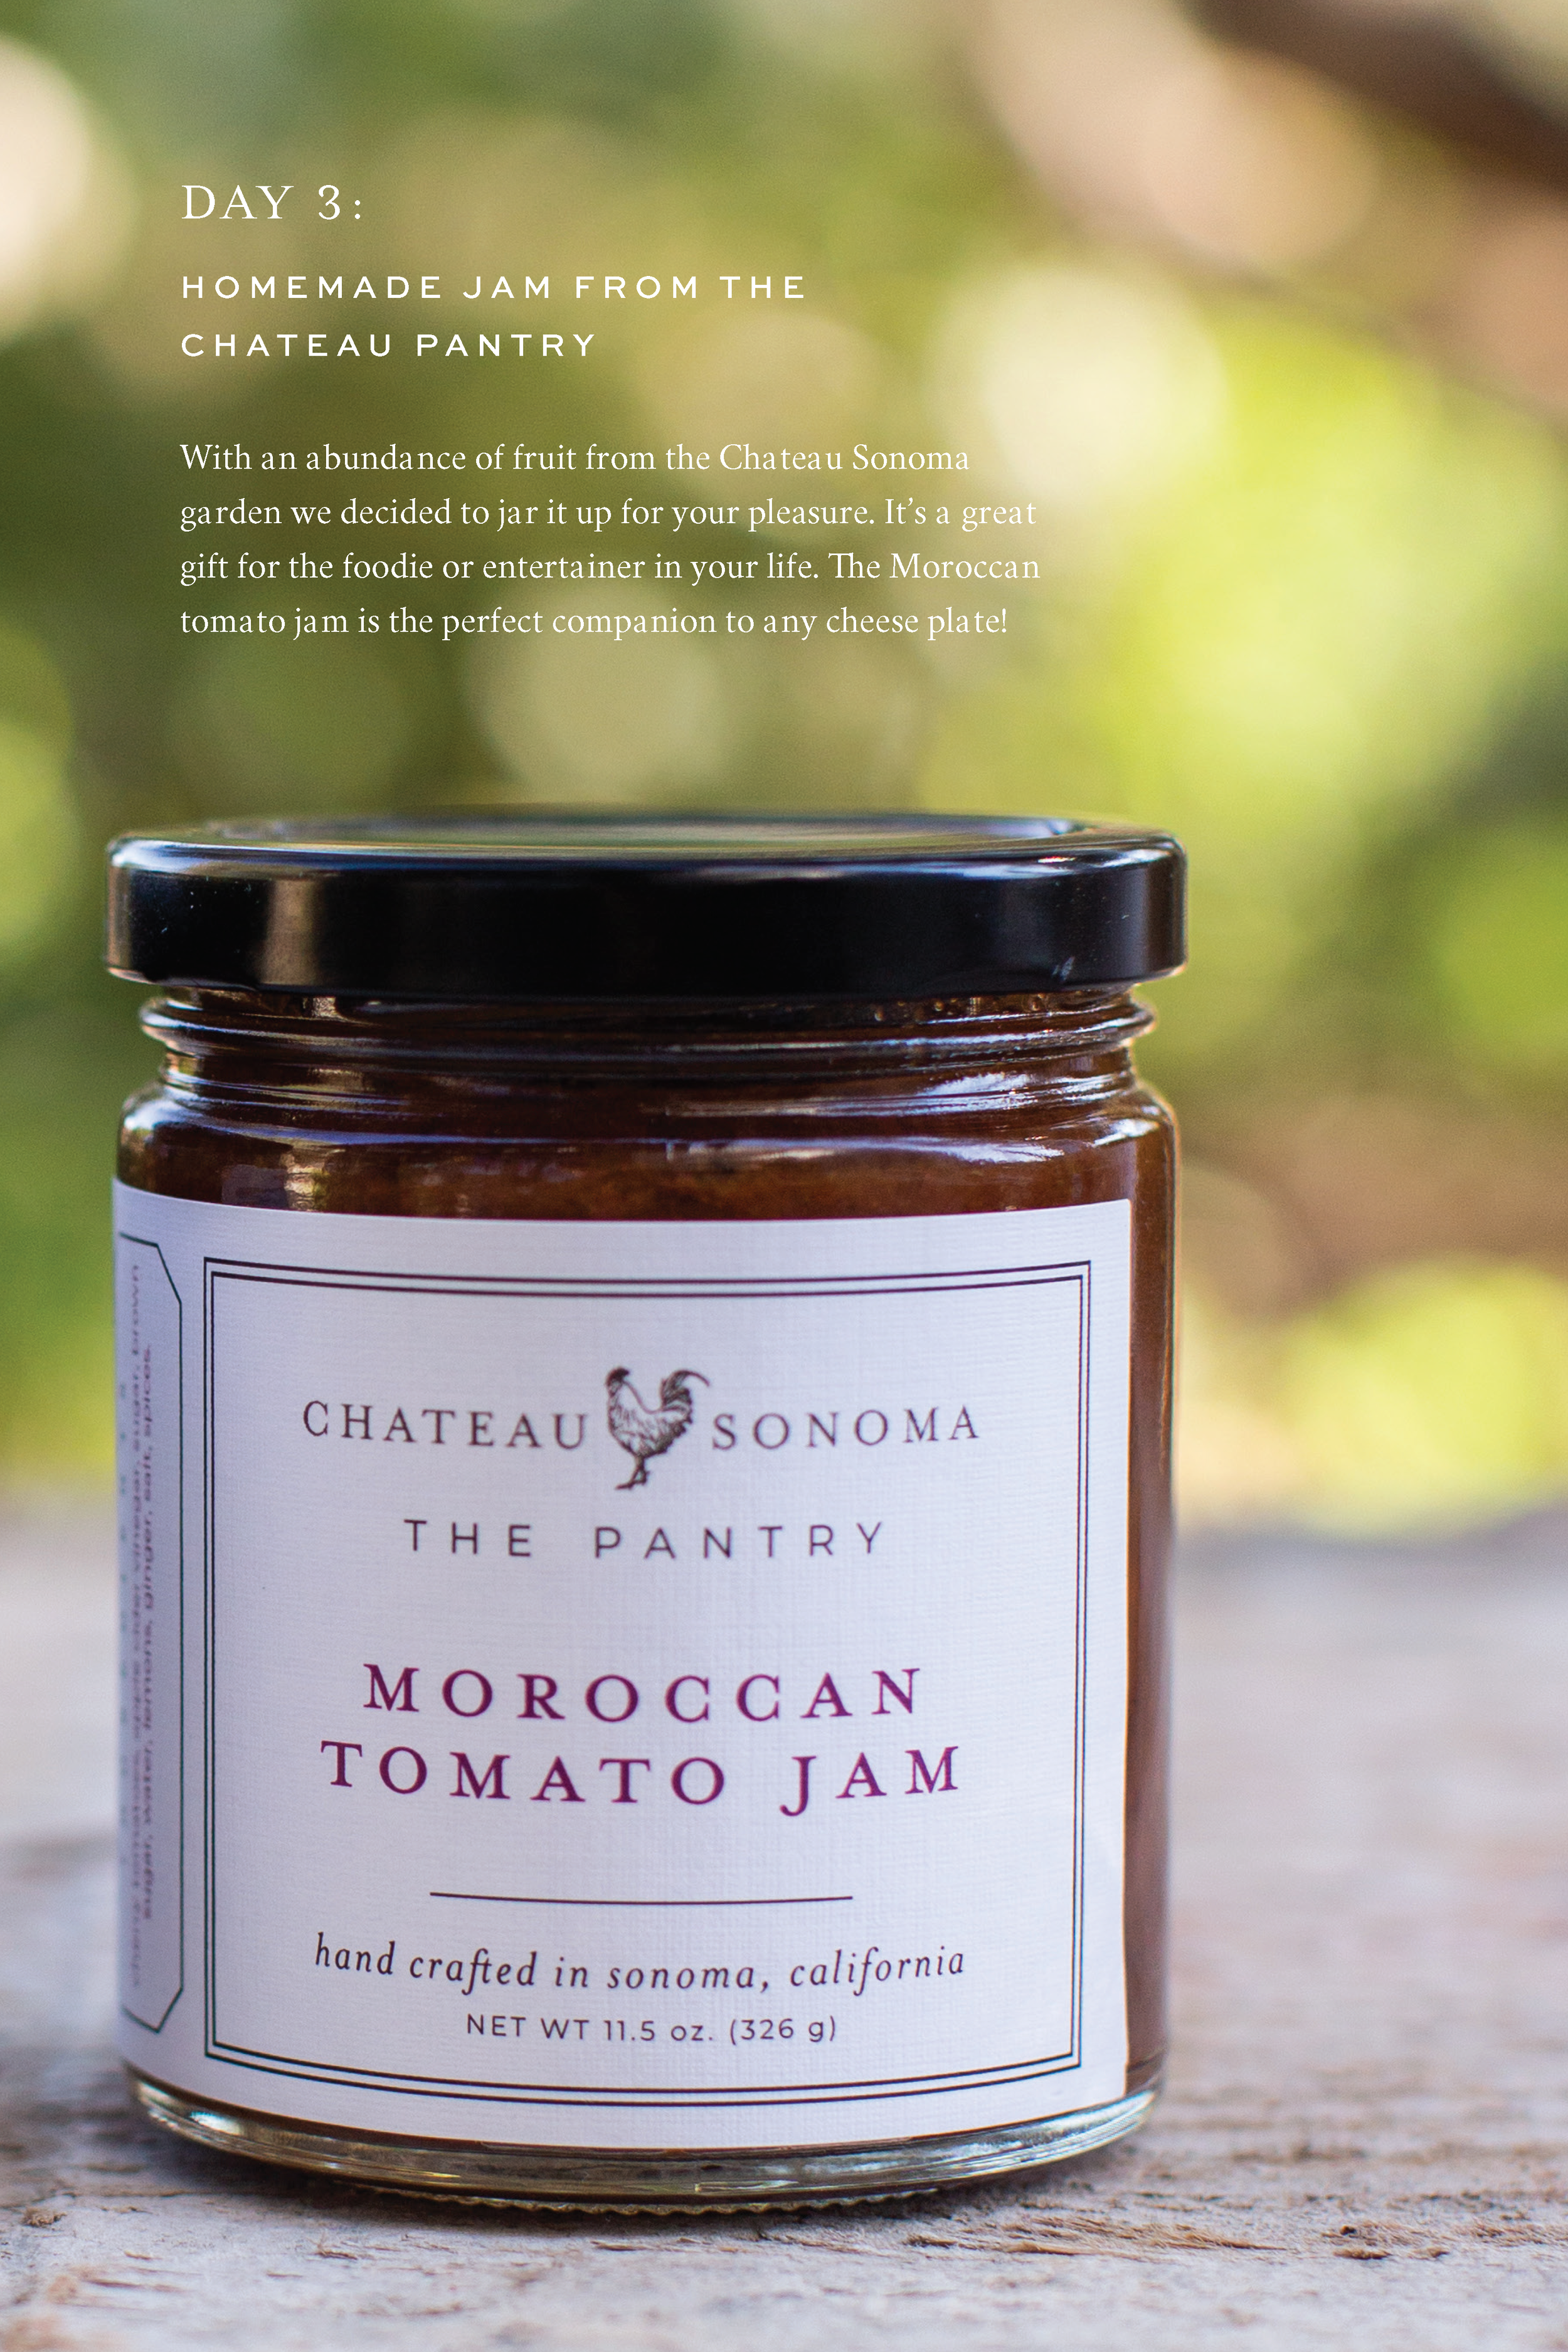 ChateauSonoma_HolidayLookbook_19_pages (1)_Page_09.png